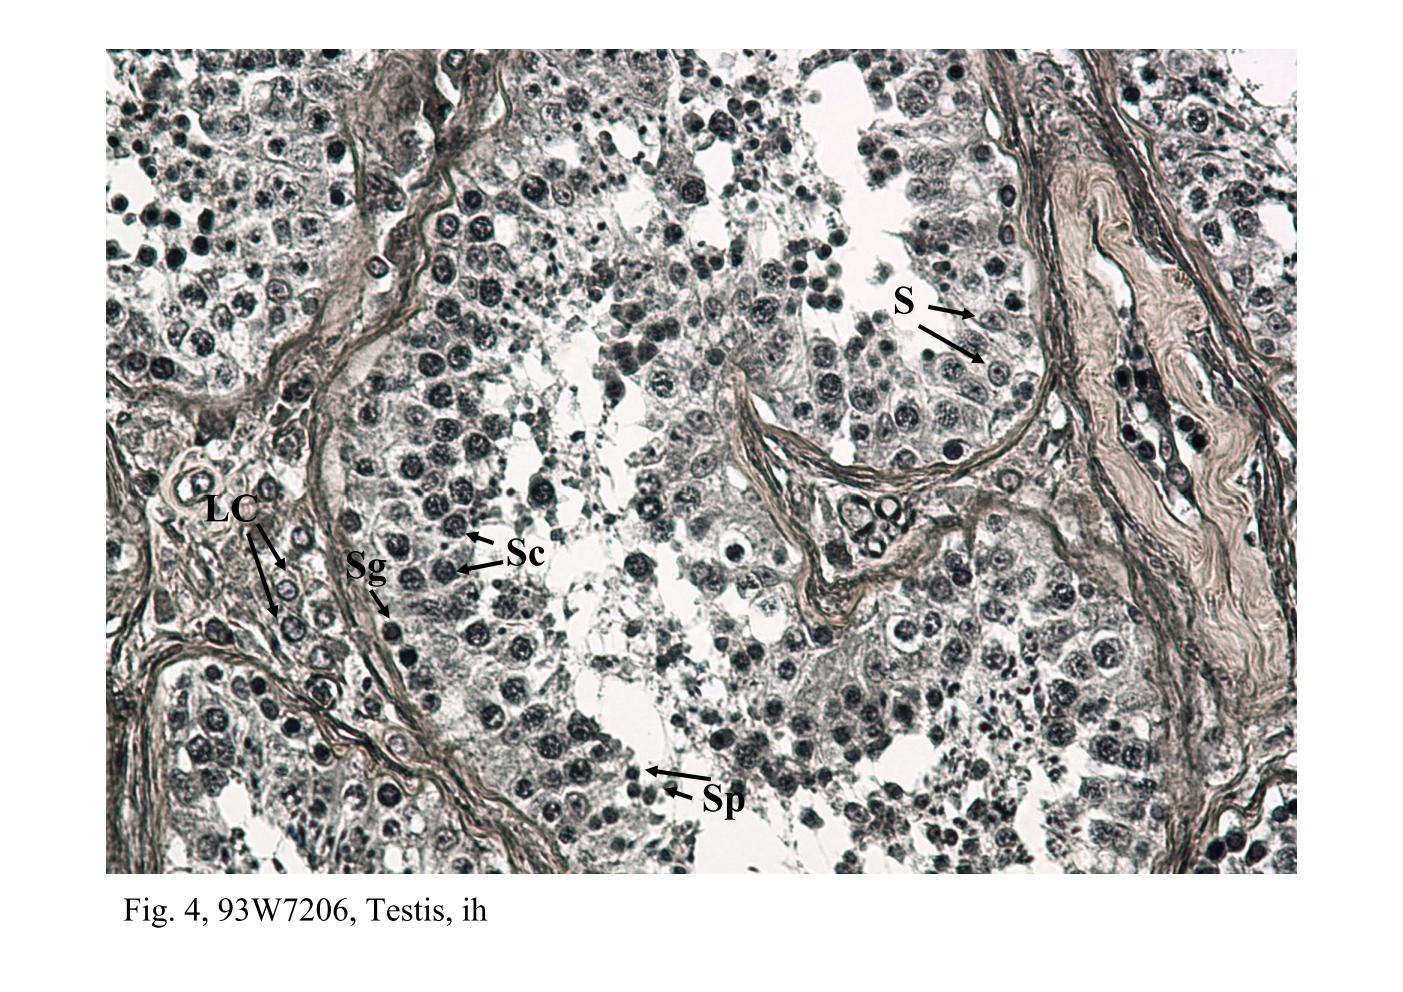 block14_09.jpg - Fig. 3 & 4, Q-1-b, Testis, h&e; 93W7206, Testis, ihExamination of the tubule epithelium reveals two kinds of cells: a  proliferating population of spermatogenic cells and a non-proliferating  population, the Sertoli cells (S). The Sertoli cells are considerably fewer  and can be recognized by their elongate, trangular, pale-staining nuclei  and conspicuous nucleolus. The Sertoli cell extends from the periphery of  the tubule to the lumen. The spermatogenic cells consist of successive  generations arranged in concentric layers. The spermatogonia (Sg) are  found at the periphery. The spermatocytes (Sc), most of them have large  round nuclei with a distinctive chromatin pattern, come to lie above the  spermatogonia. The spermatid (Sp) consists of one or two generations and  occupies the site closest to the lumen.In high magnification, it reveals a population of Leydig cells (LC) that occur  in small clusters and lie in the interstitial space between adjacent tubules.  They are readily identified by their location, small round nucleus and  eosinophilic cytoplasm.